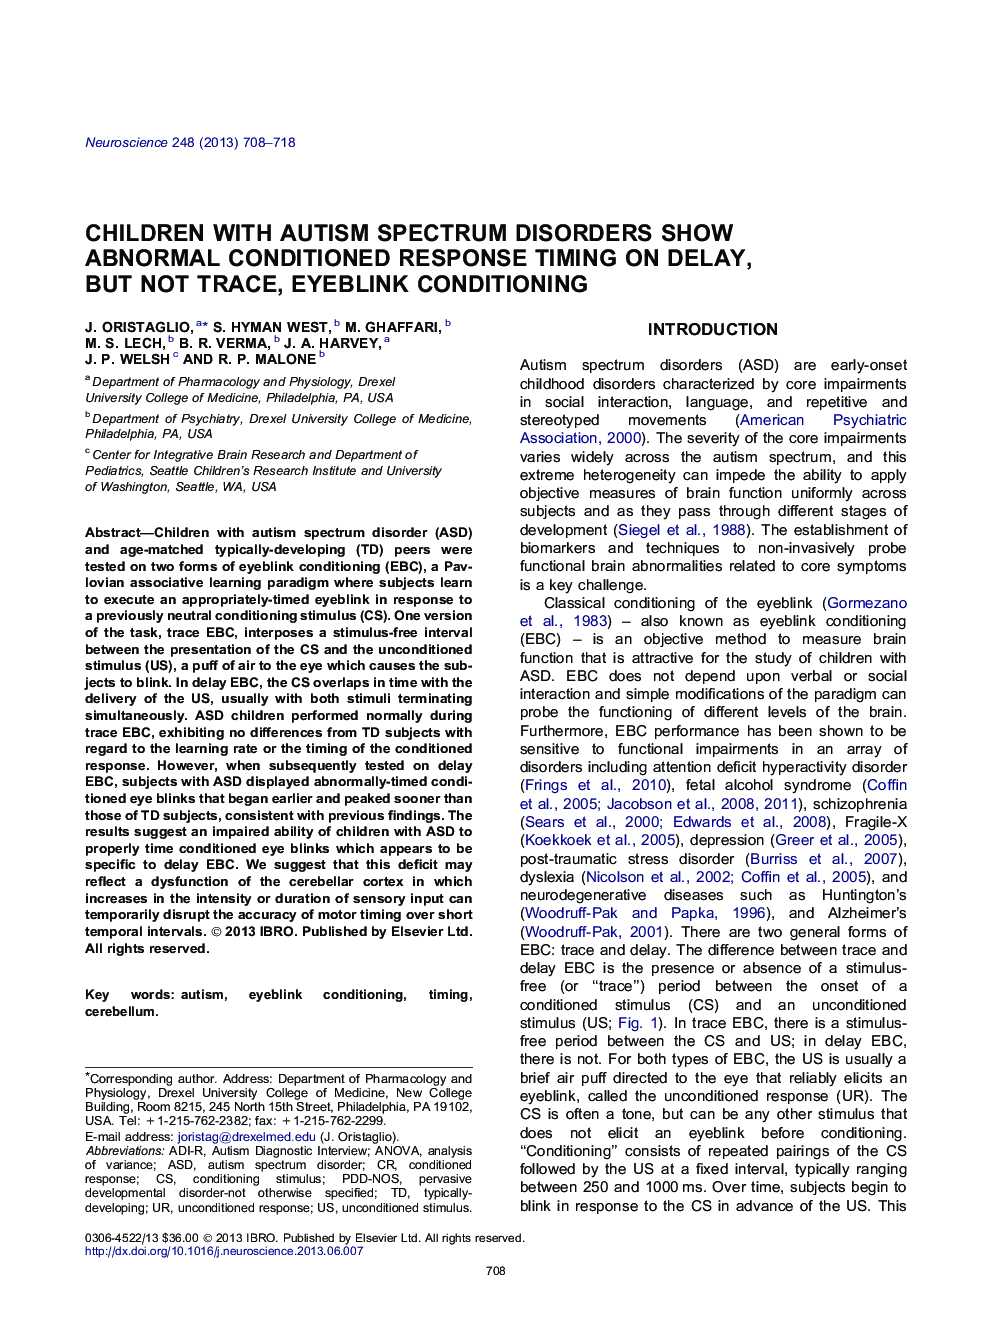 Children with autism spectrum disorders show abnormal conditioned response timing on delay, but not trace, eyeblink conditioning